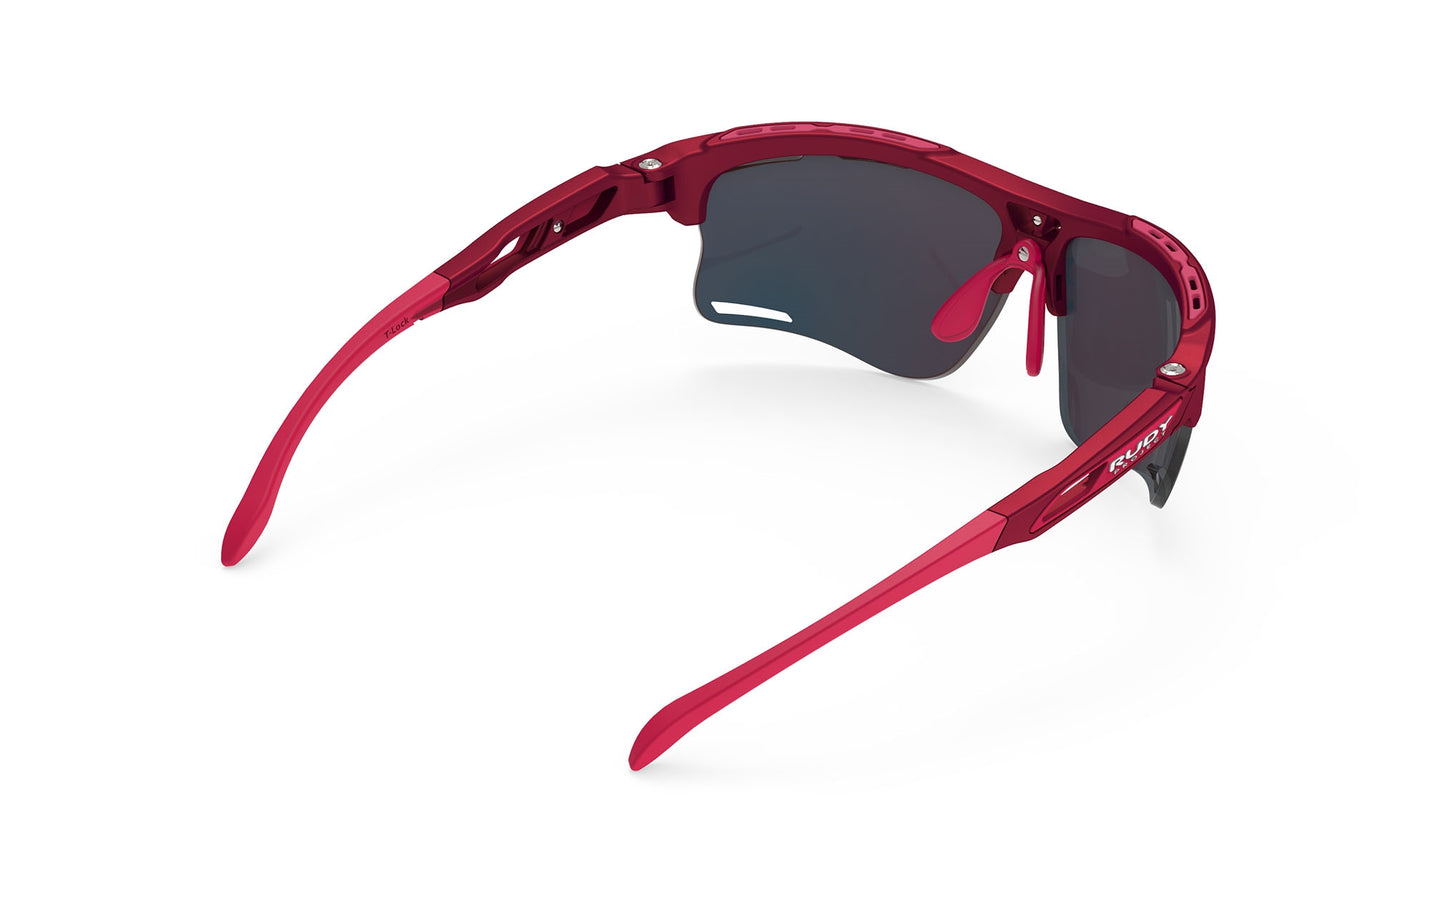 Load image into Gallery viewer, Rudy Project Keyblade Merlot Matte - Multilaser Red Sunglasses
